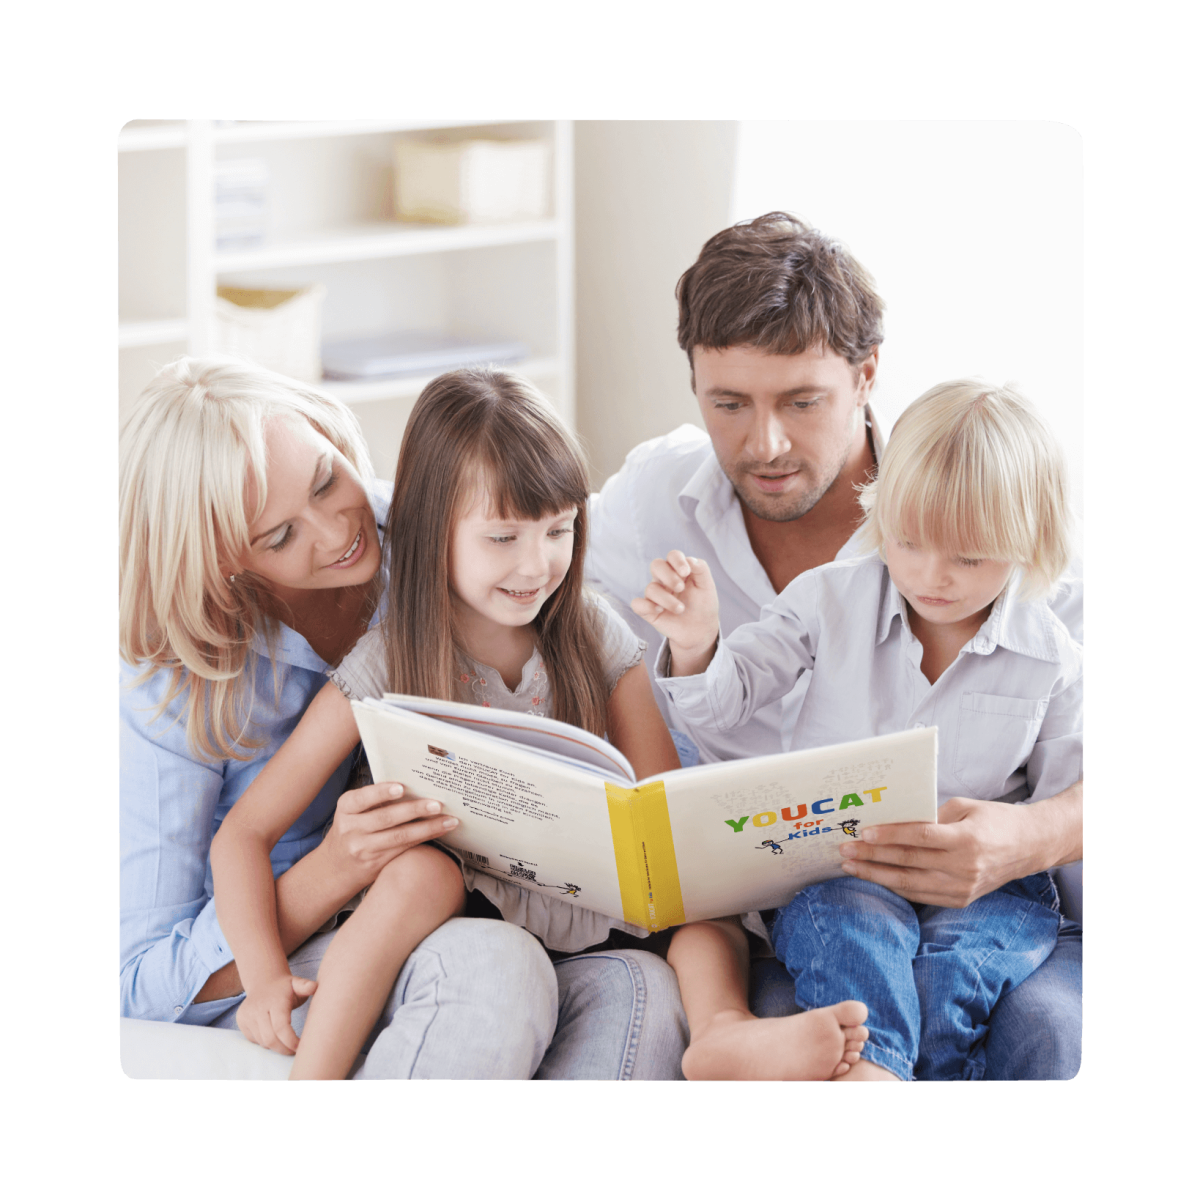 family of four reading the youcat for kids book